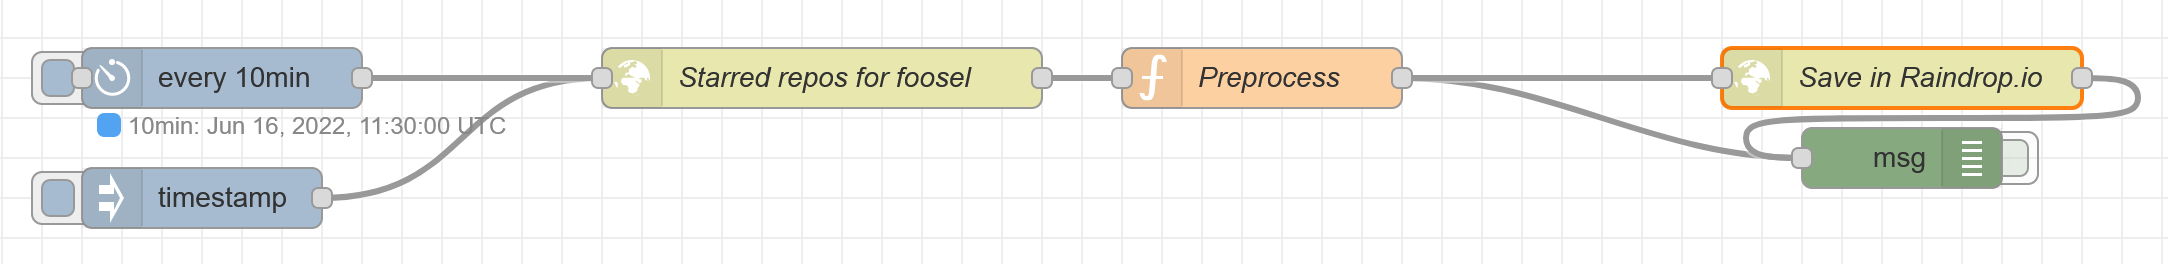 Screenshot of a NodeRED flow. Two nodes &ldquo;every 10min&rdquo; and &ldquo;timestamp&rdquo; lead to a node &ldquo;Starred repos for foosel&rdquo;. That is wired to &ldquo;Preprocess&rdquo; which in turn is wired to &ldquo;Save in Raindrop.io&rdquo;